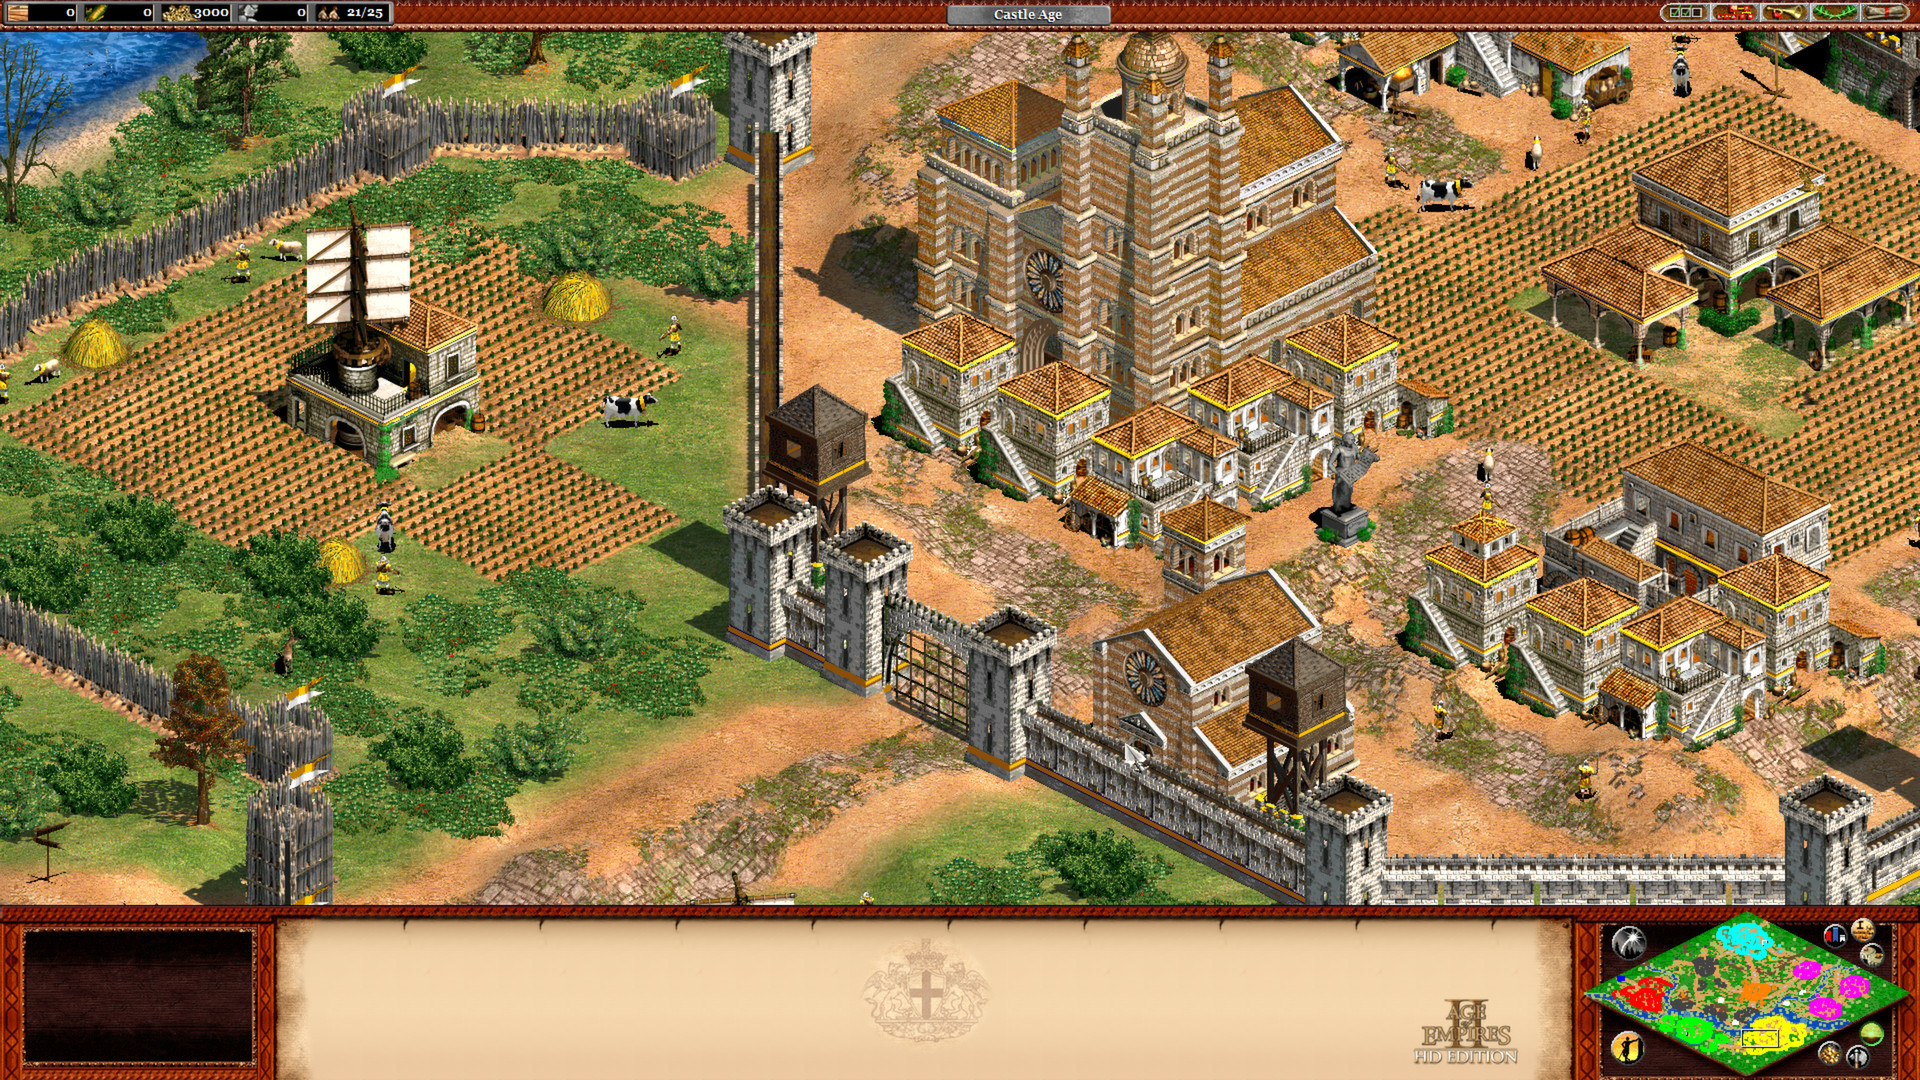 Age of Empires II (2013): The Forgotten on Steam